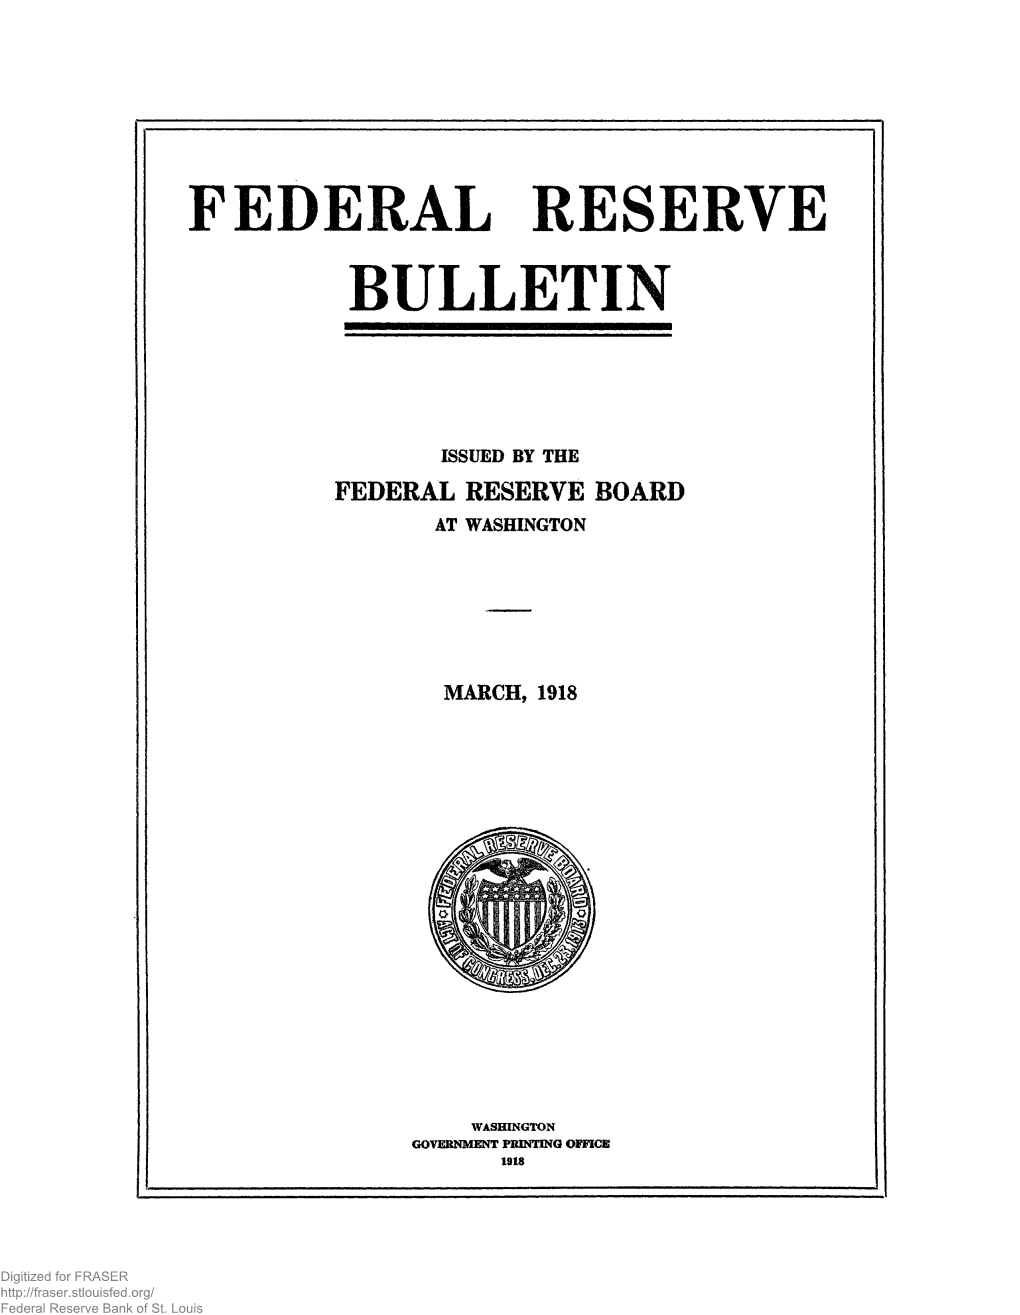 Federal Reserve Bulletin March 1918